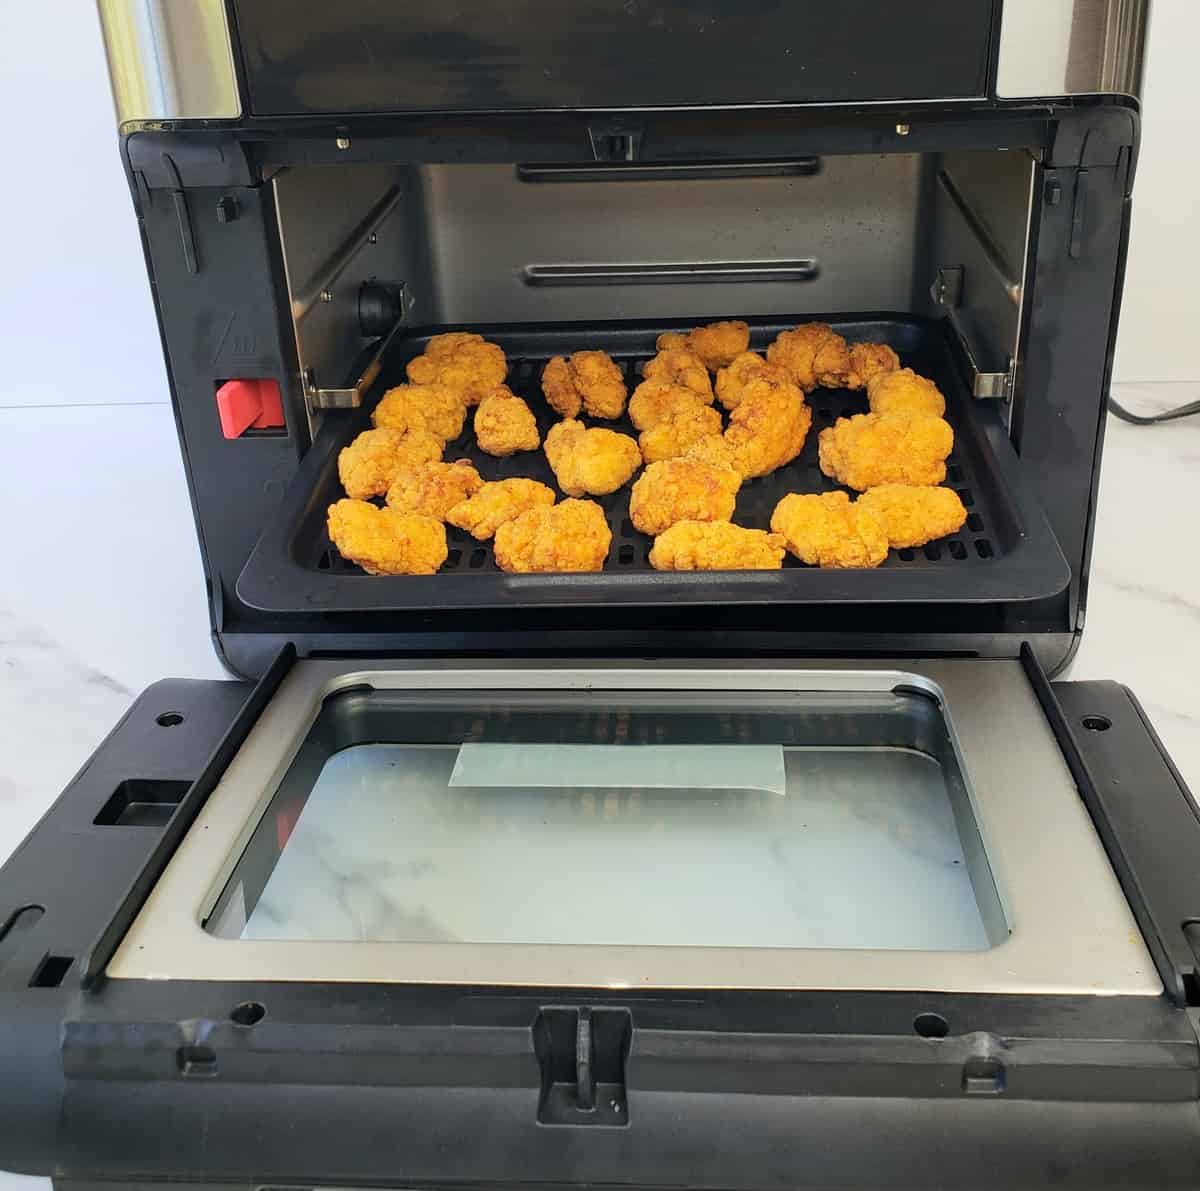 Chicken nuggets in an opened air fryer.